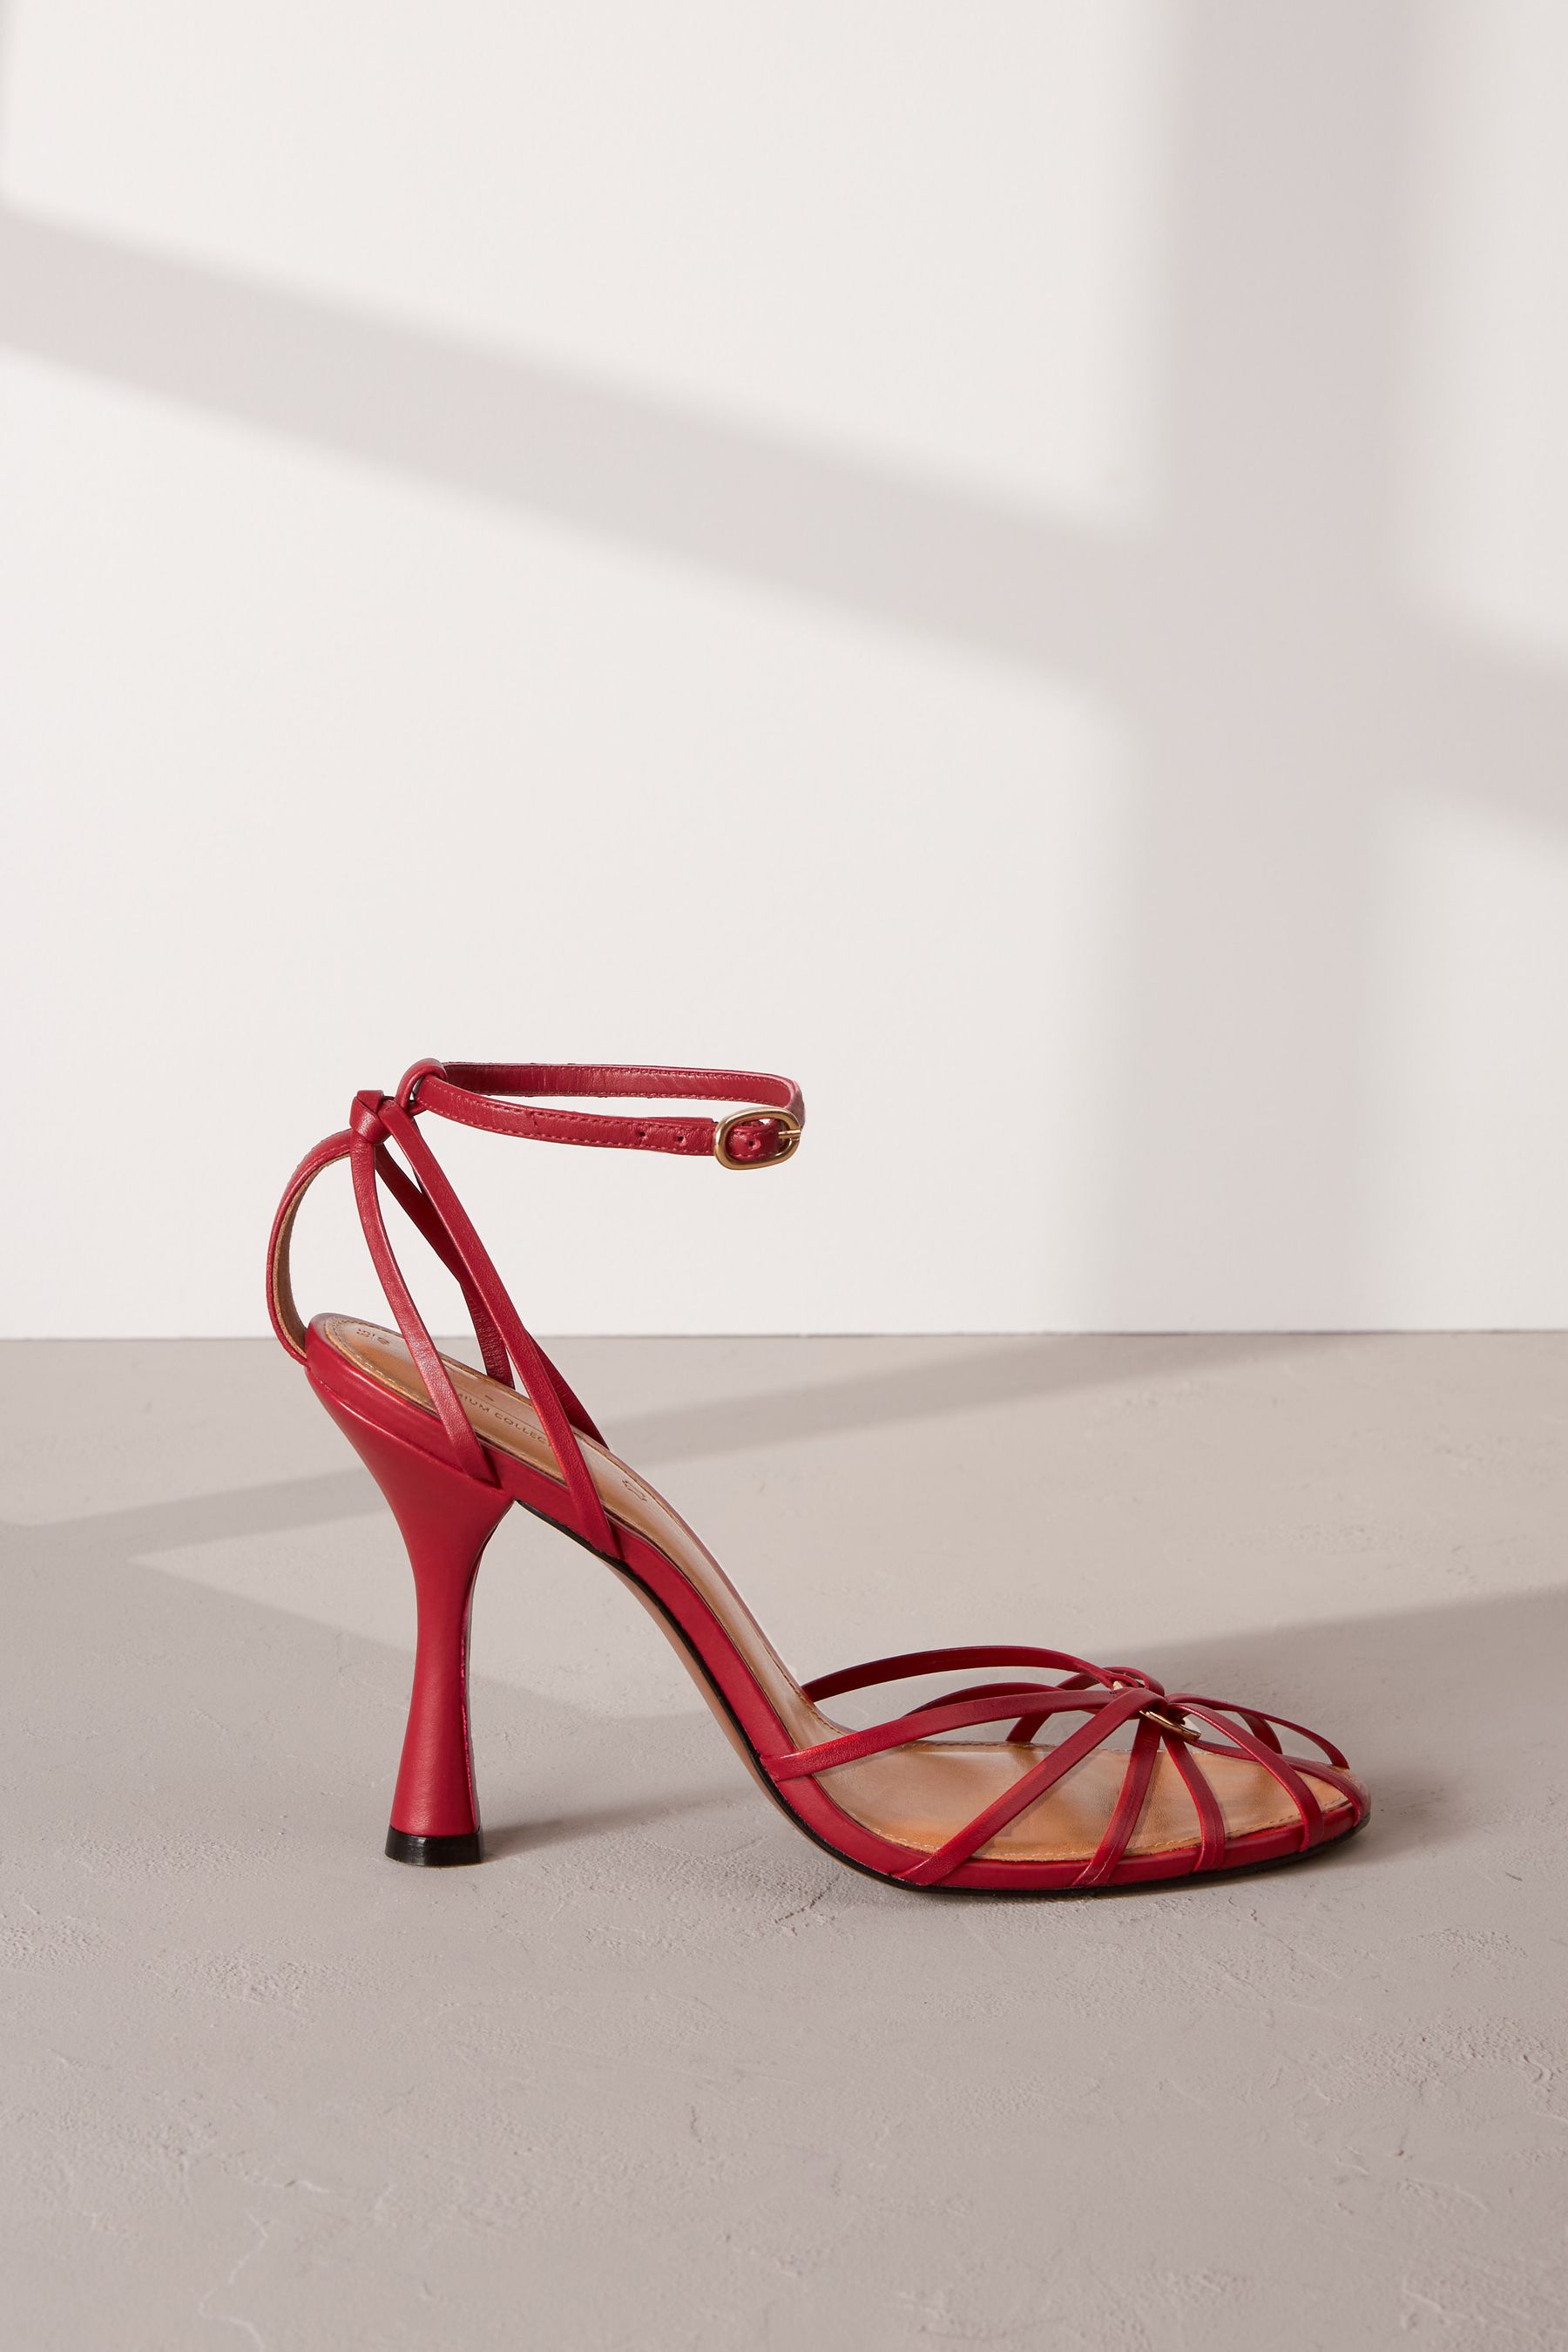 Buy Red Premium Leather Cage Heeled Sandals from the Next UK online shop